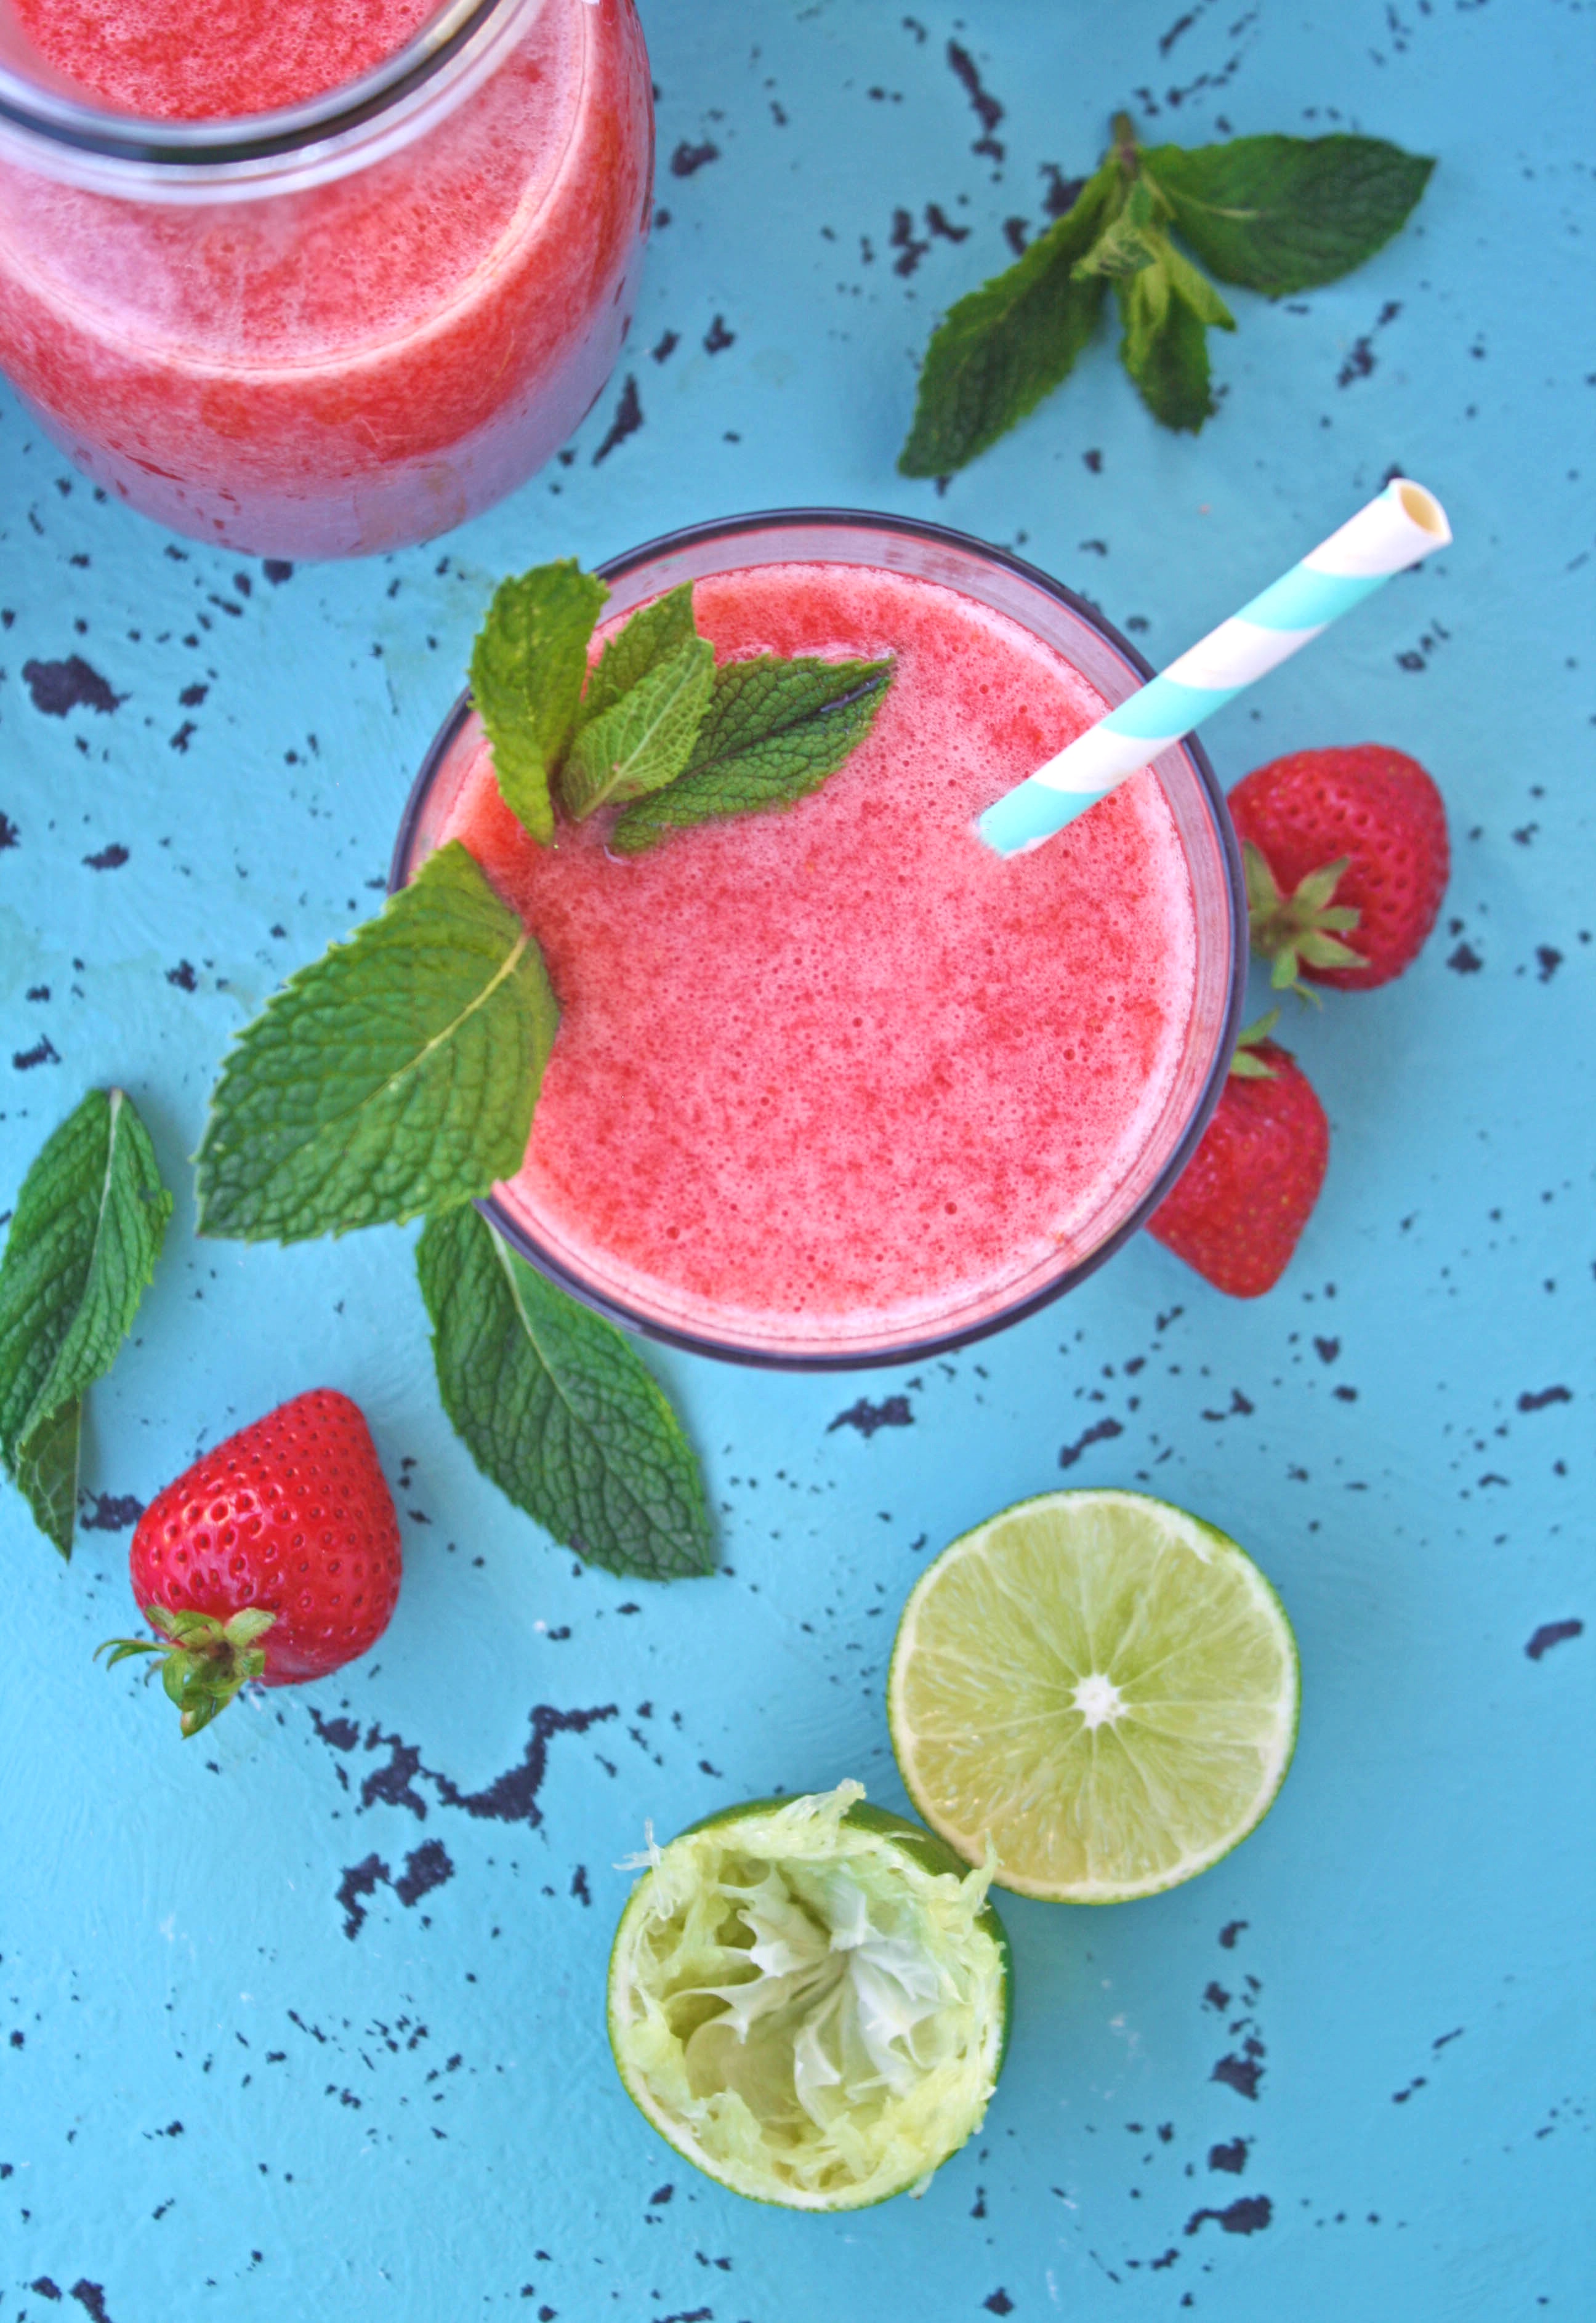 Strawberry-Mint Agua Fresca is a fab drink! You'll love this fruity and refreshing treat for the warm weather.